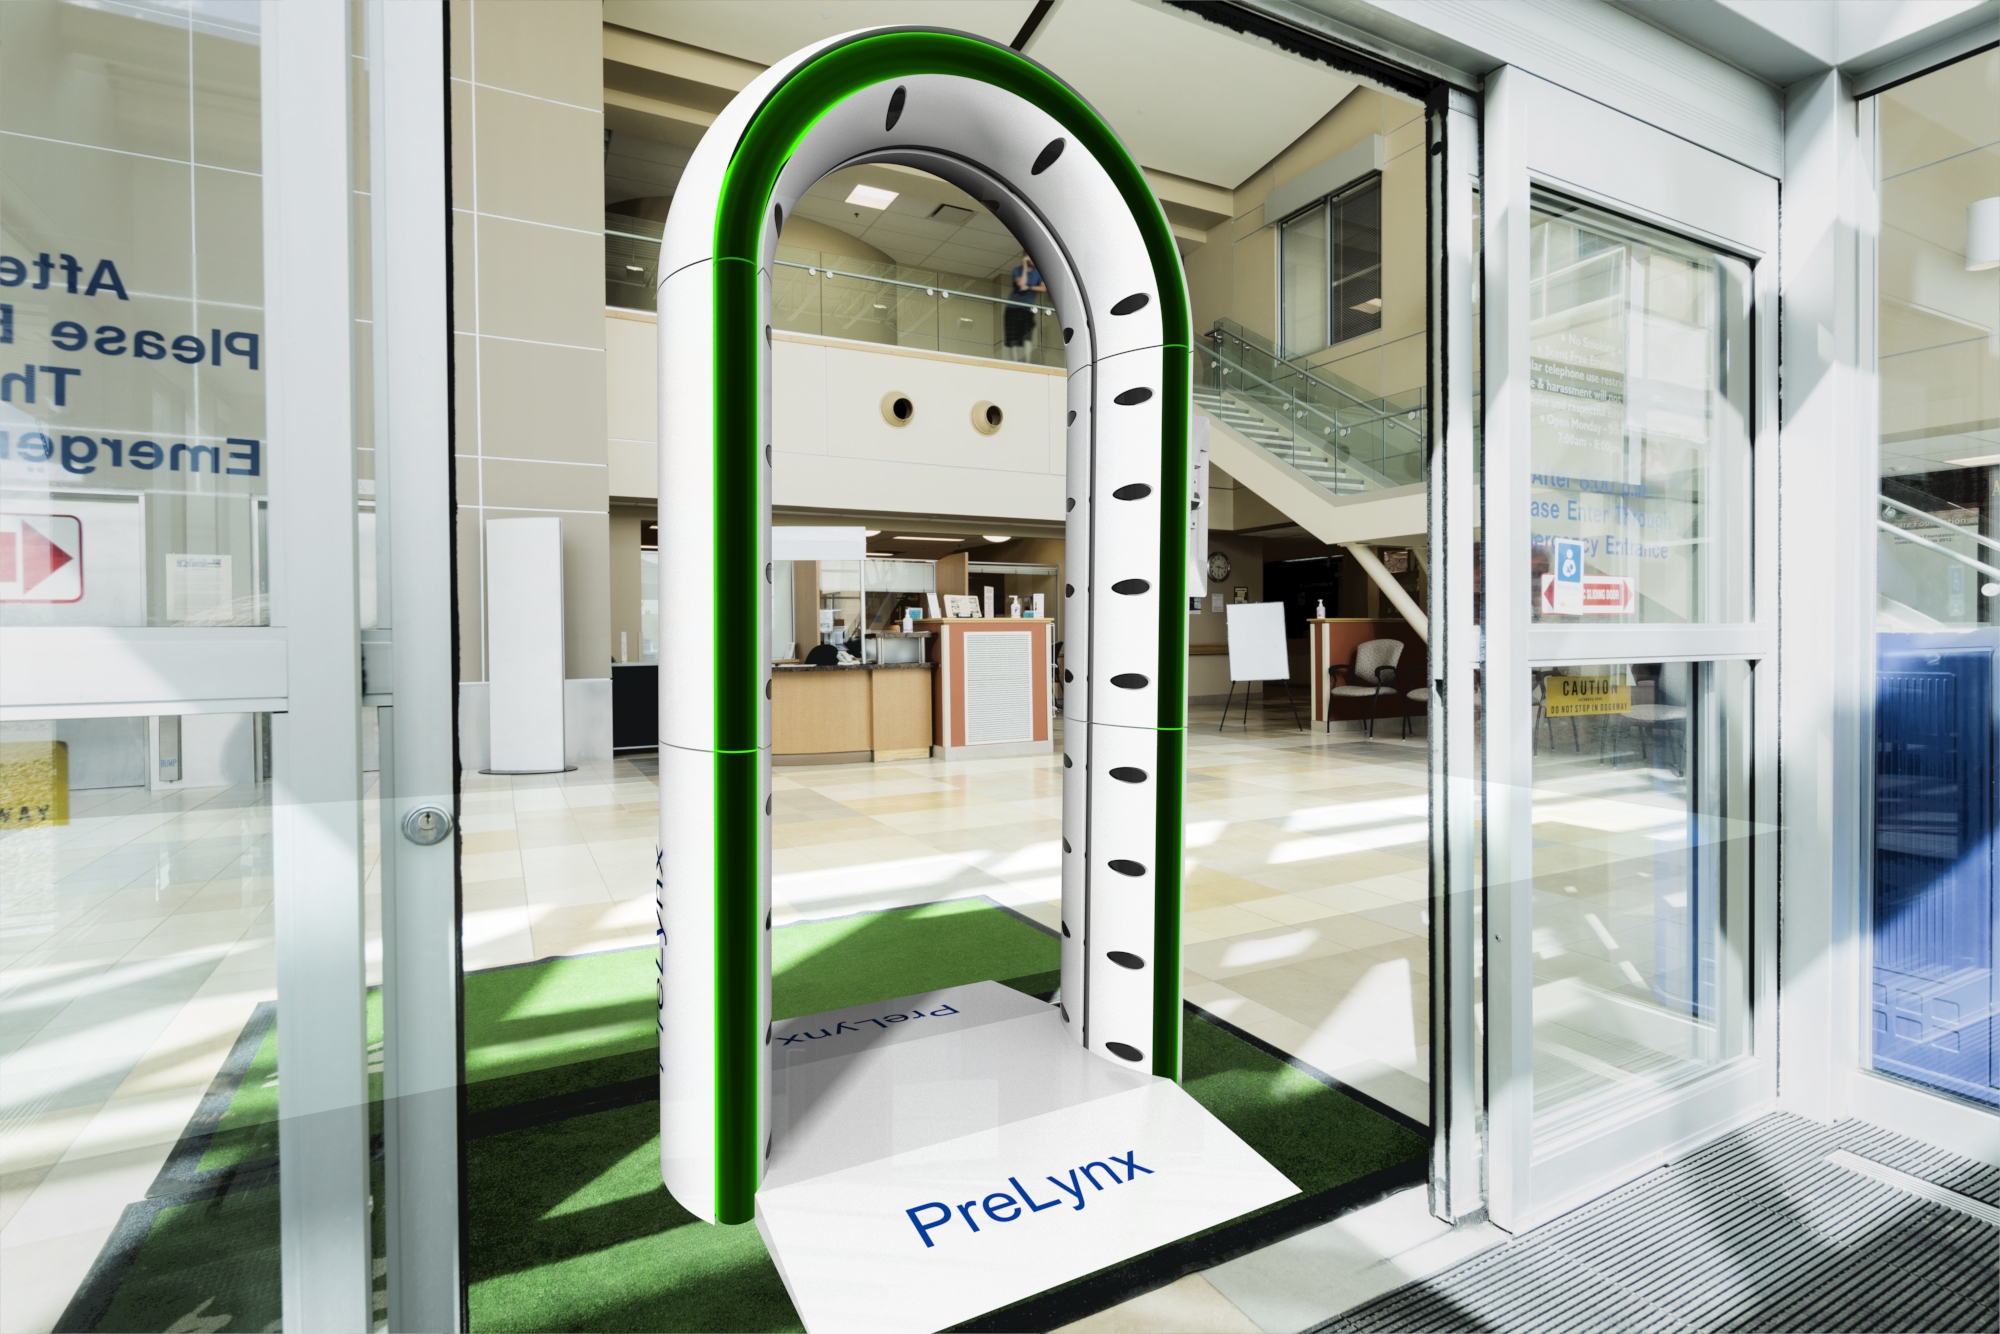 PreLynx Portals Allow You to Reopen with Confidence